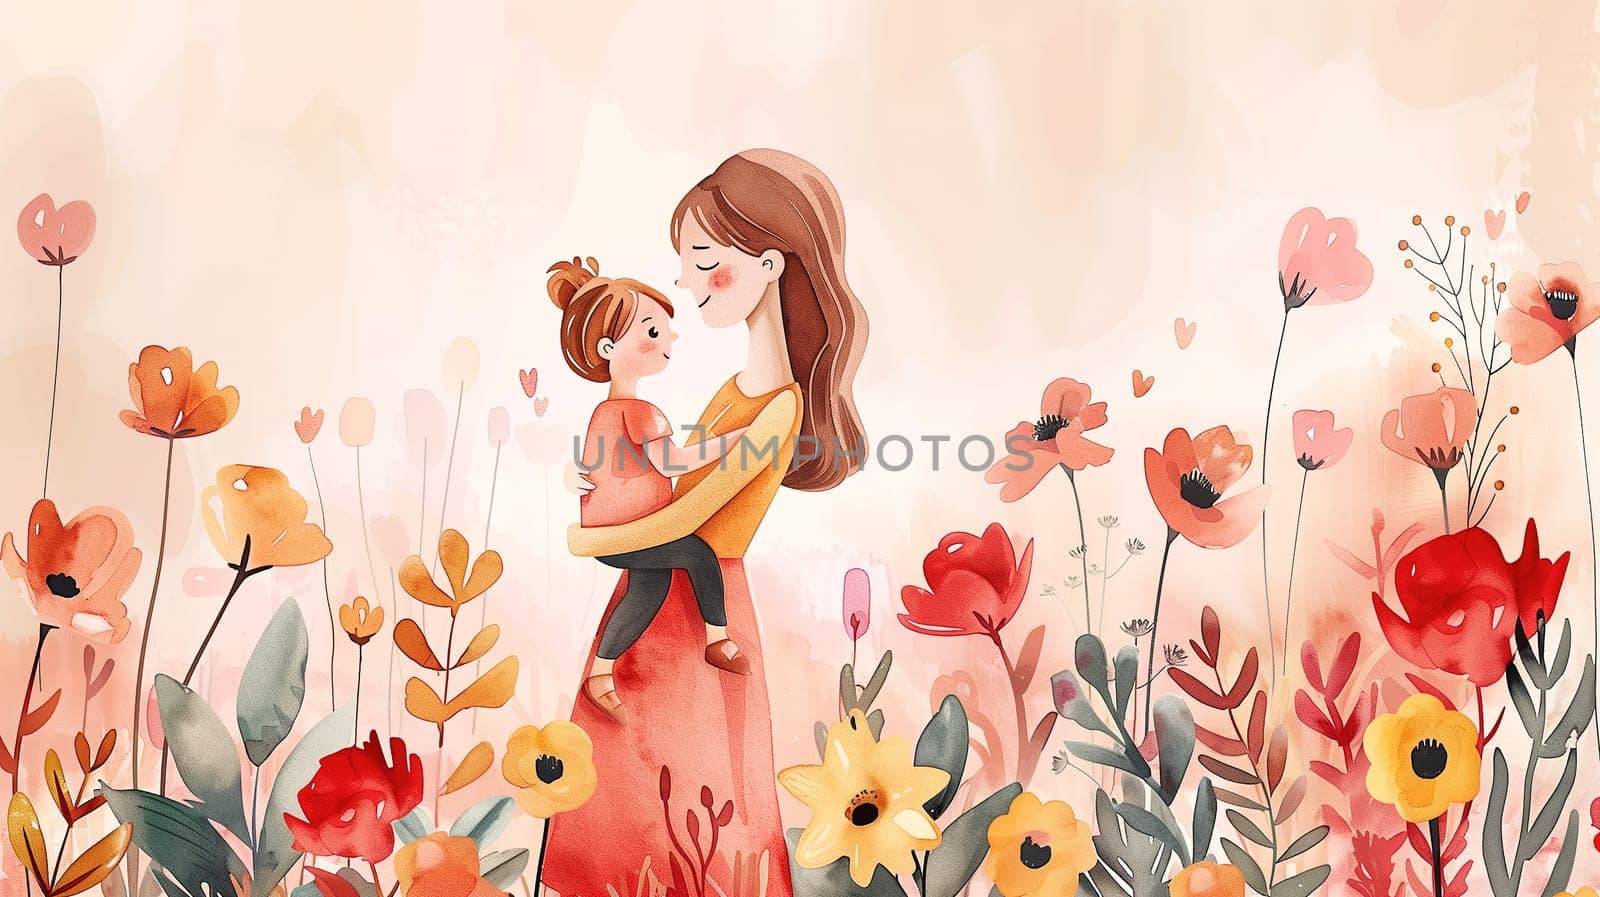 A woman is standing in a field of colorful flowers, gently cradling a child in her arms. Both mother and child are surrounded by a sea of vibrant blooms, creating a heartwarming scene of love and tenderness on a sunny day.